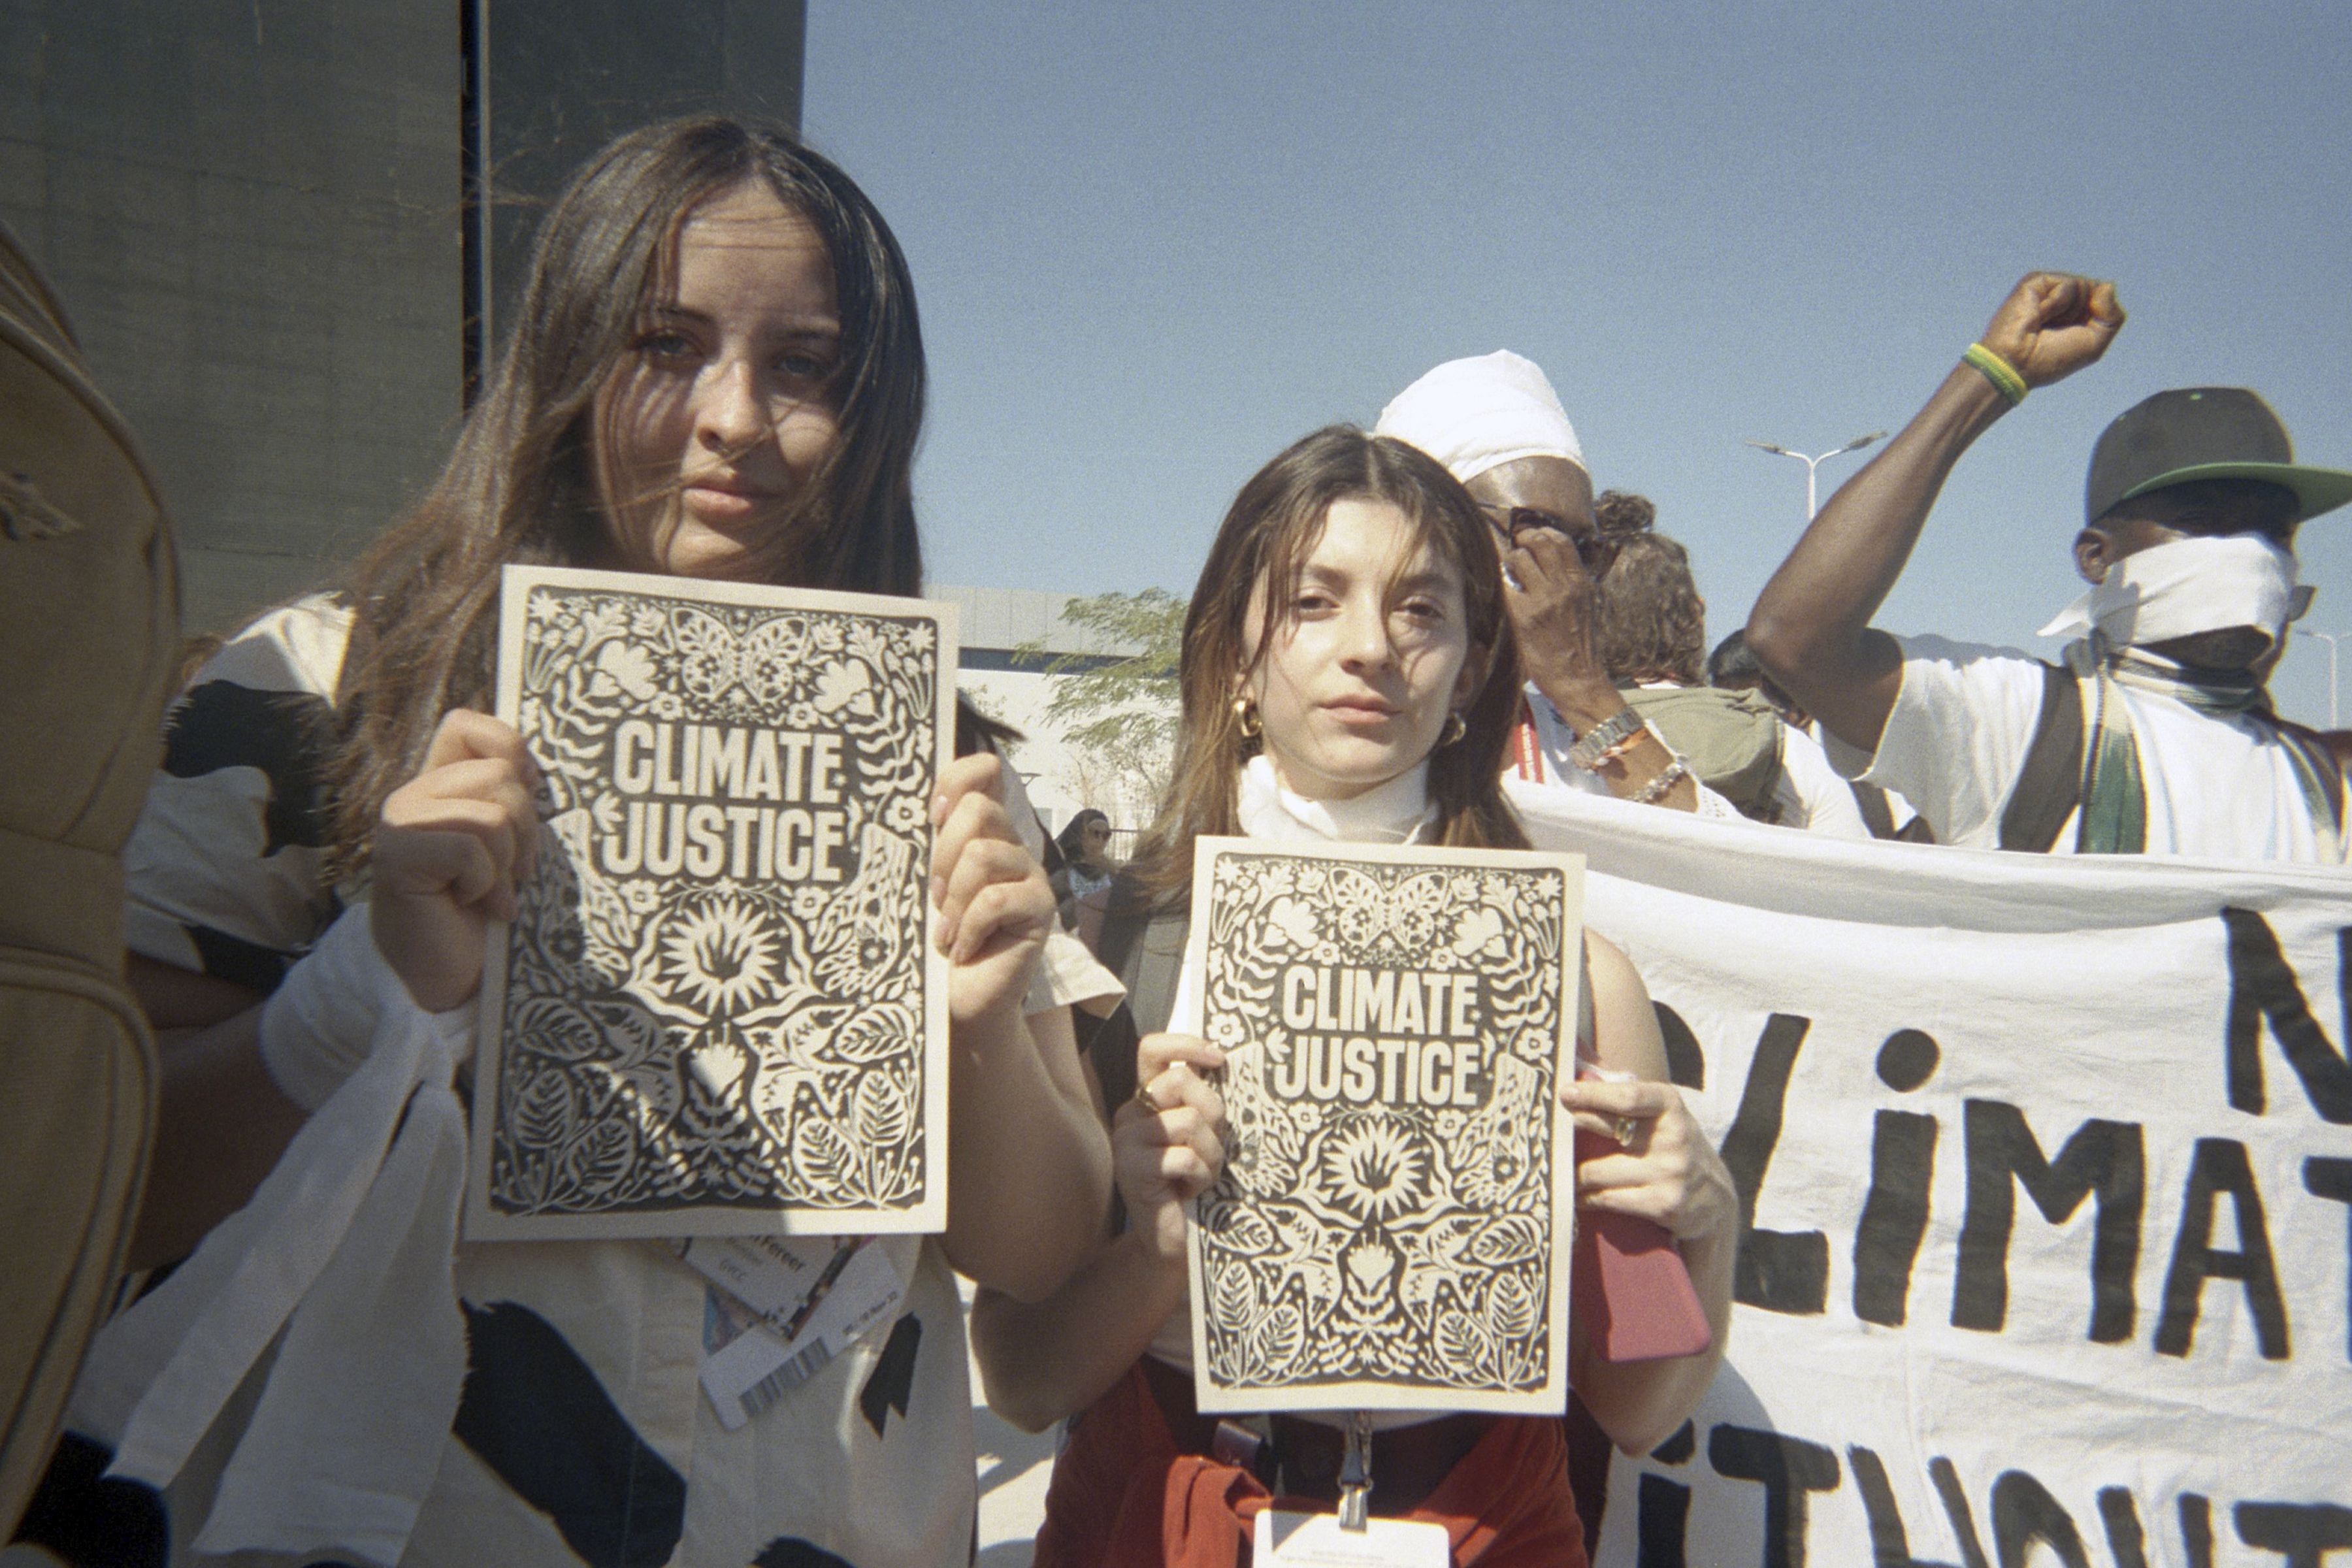 Karin Watson (Chile) and Mariana Chaverri (Costa Rica) with 'Climate Justice' signs at a demonstration